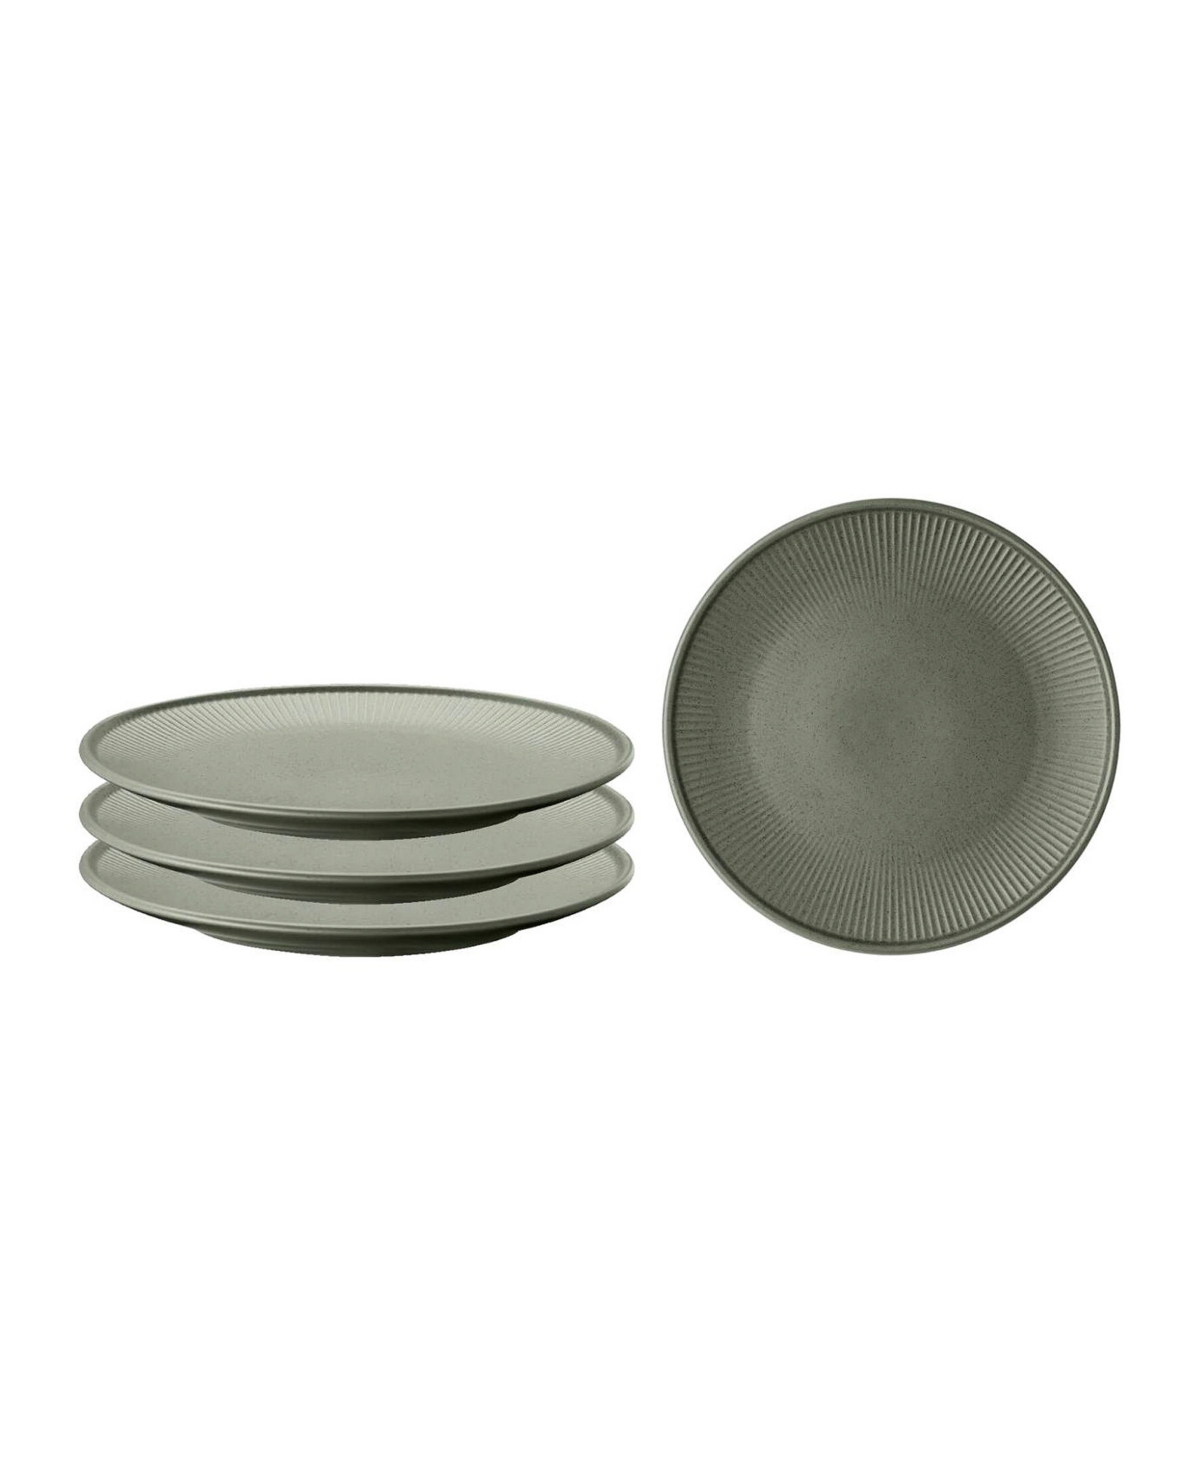 Clay Set of 4 Salad Plates, Service for 4 - Gray